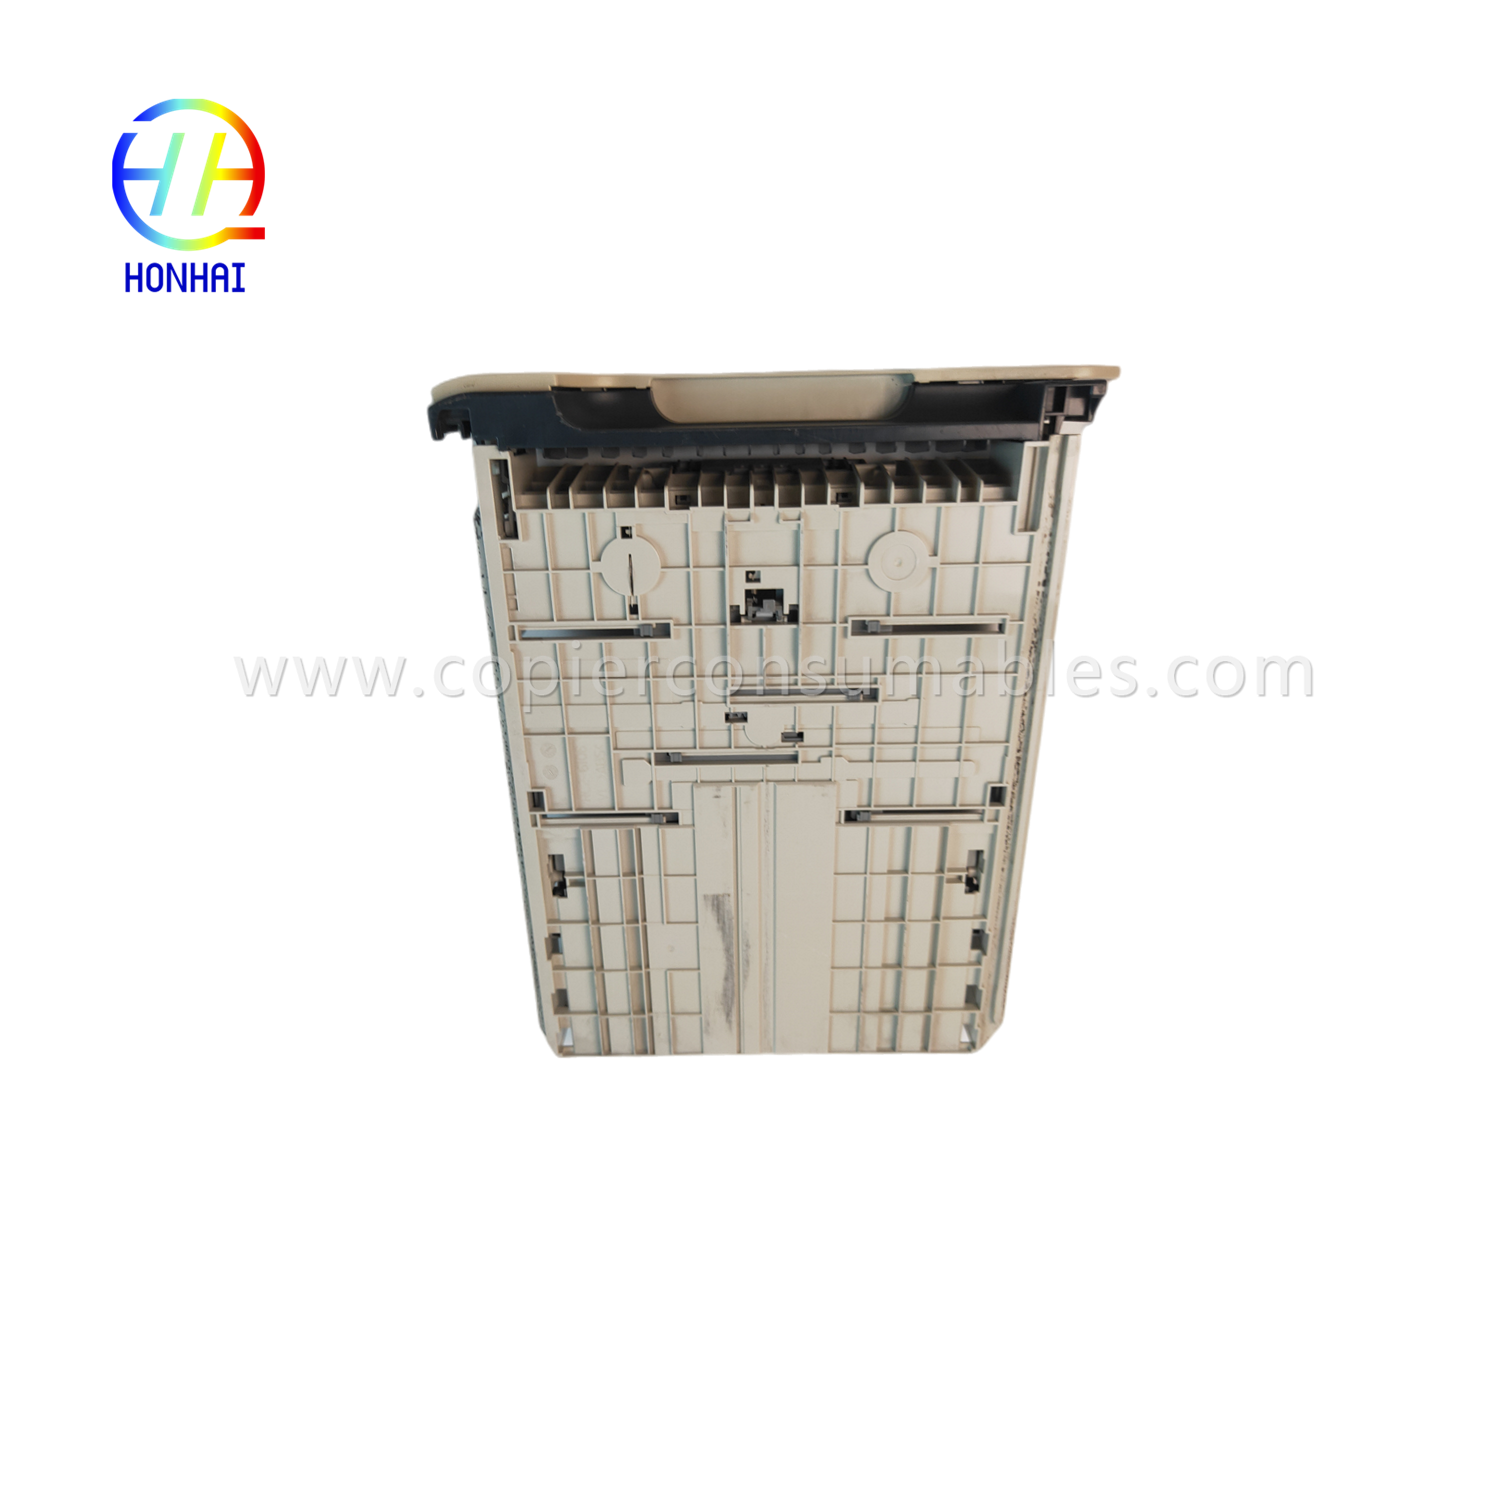 https://www.copierconsumables.com/paper-tray-for-hp-rc2-6106-rc2-6106-p2035-p2055-printers-product/